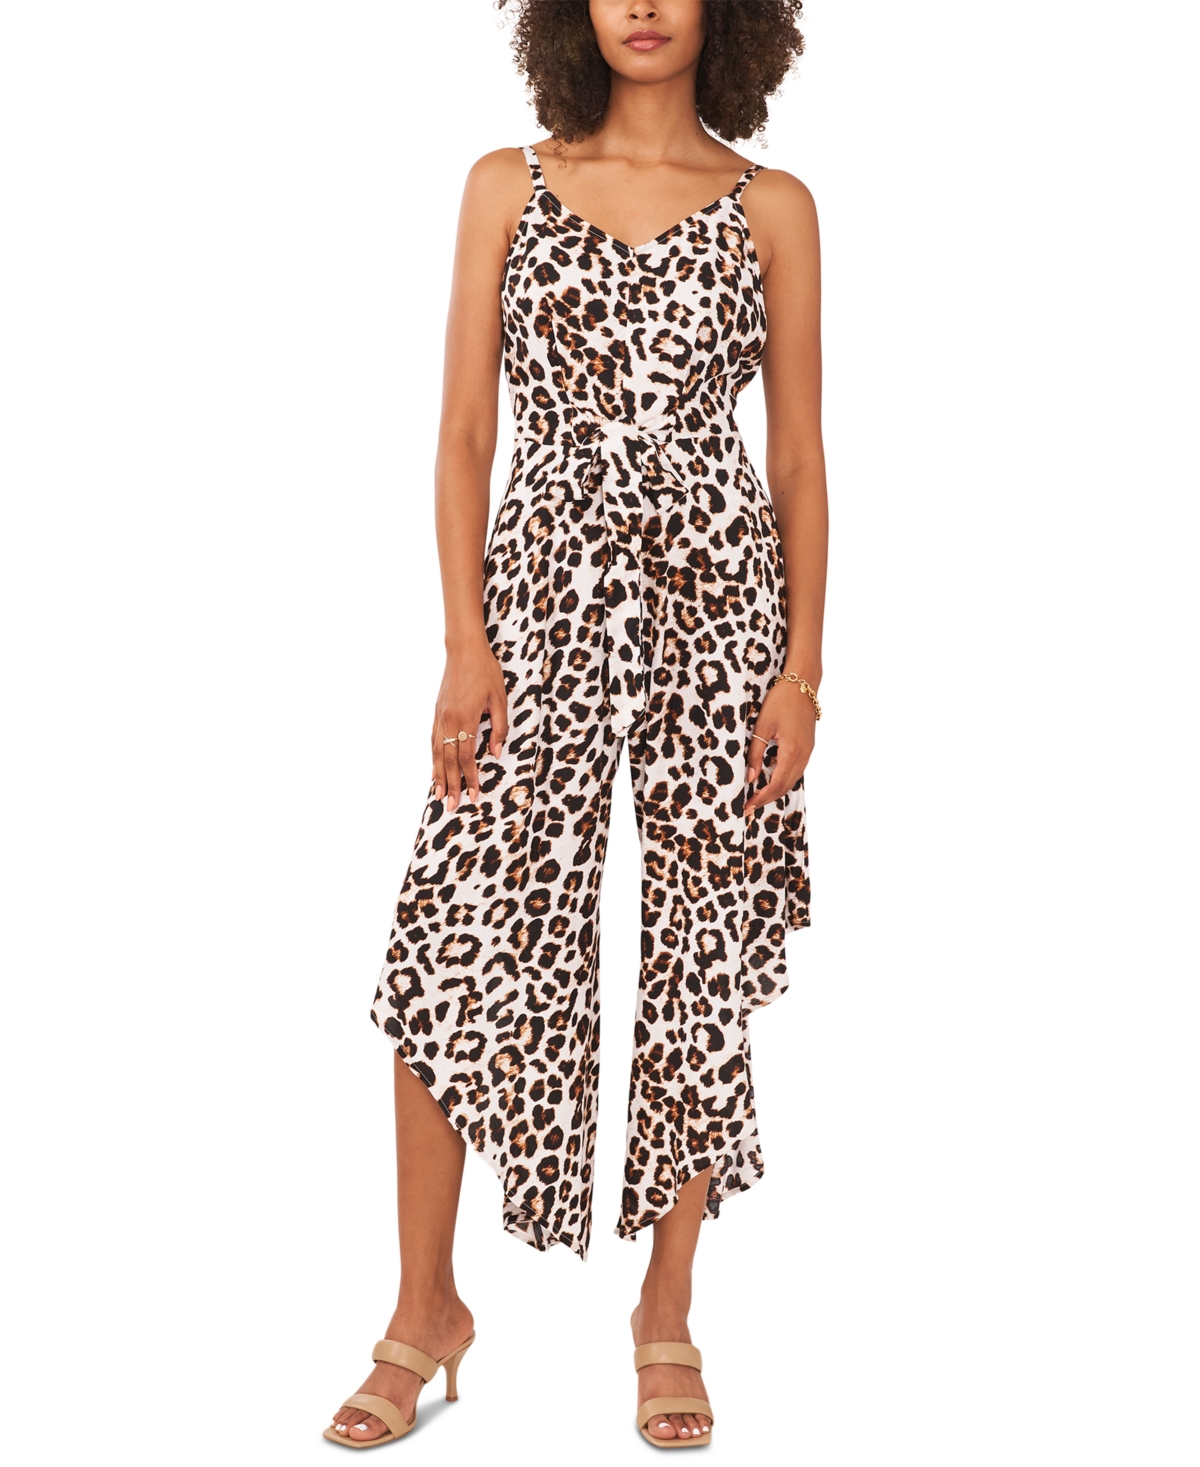 Vince Camuto Women's Animal-Print Tie-Front Sleeveless Jumpsuit